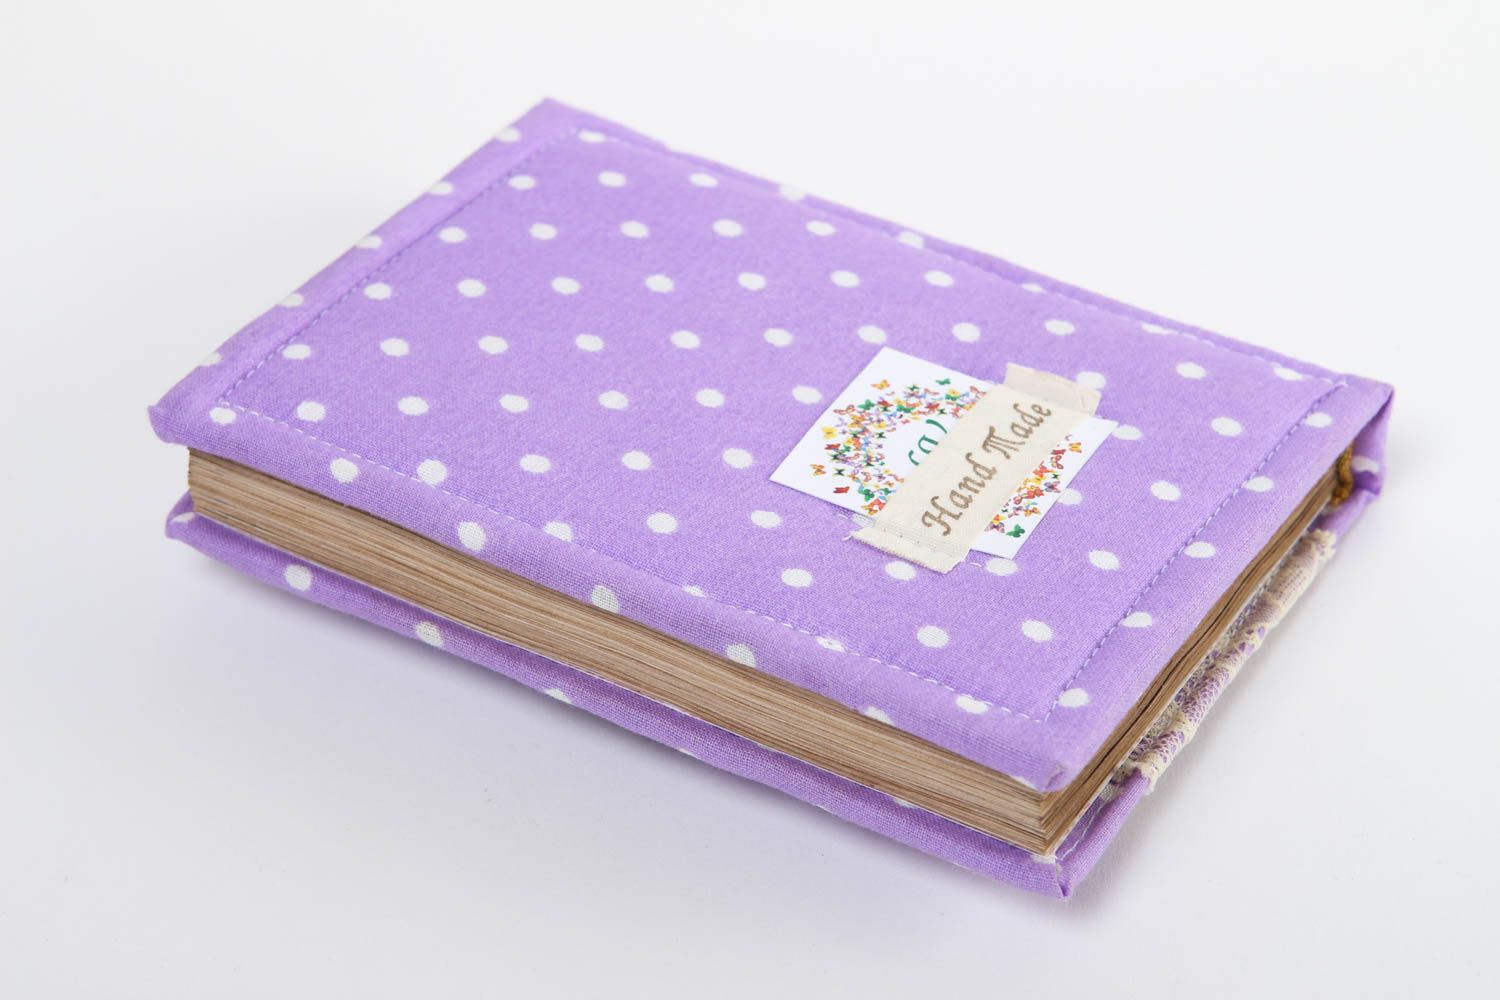 Handmade notebook with textile cover tender gift for girl stylish notebook photo 2